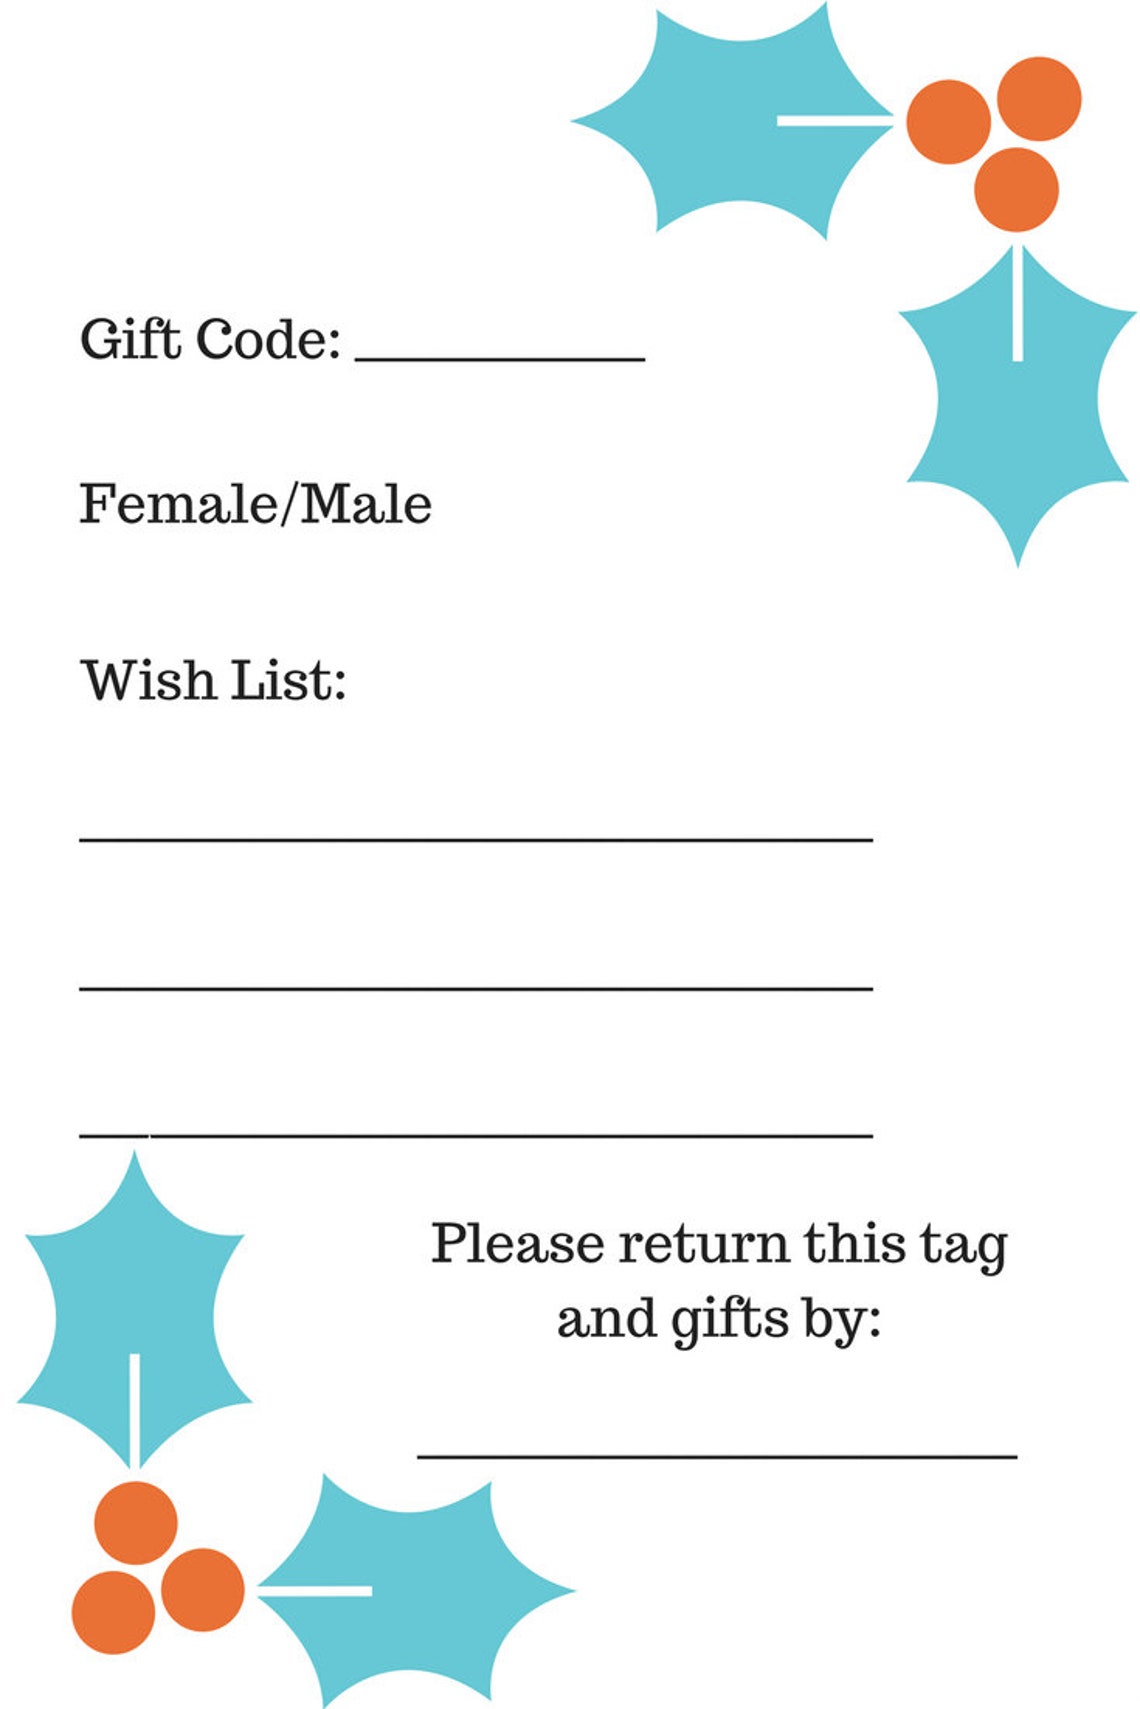 angel-tree-gift-tags-giving-tree-template-not-editable-digital-download-etsy